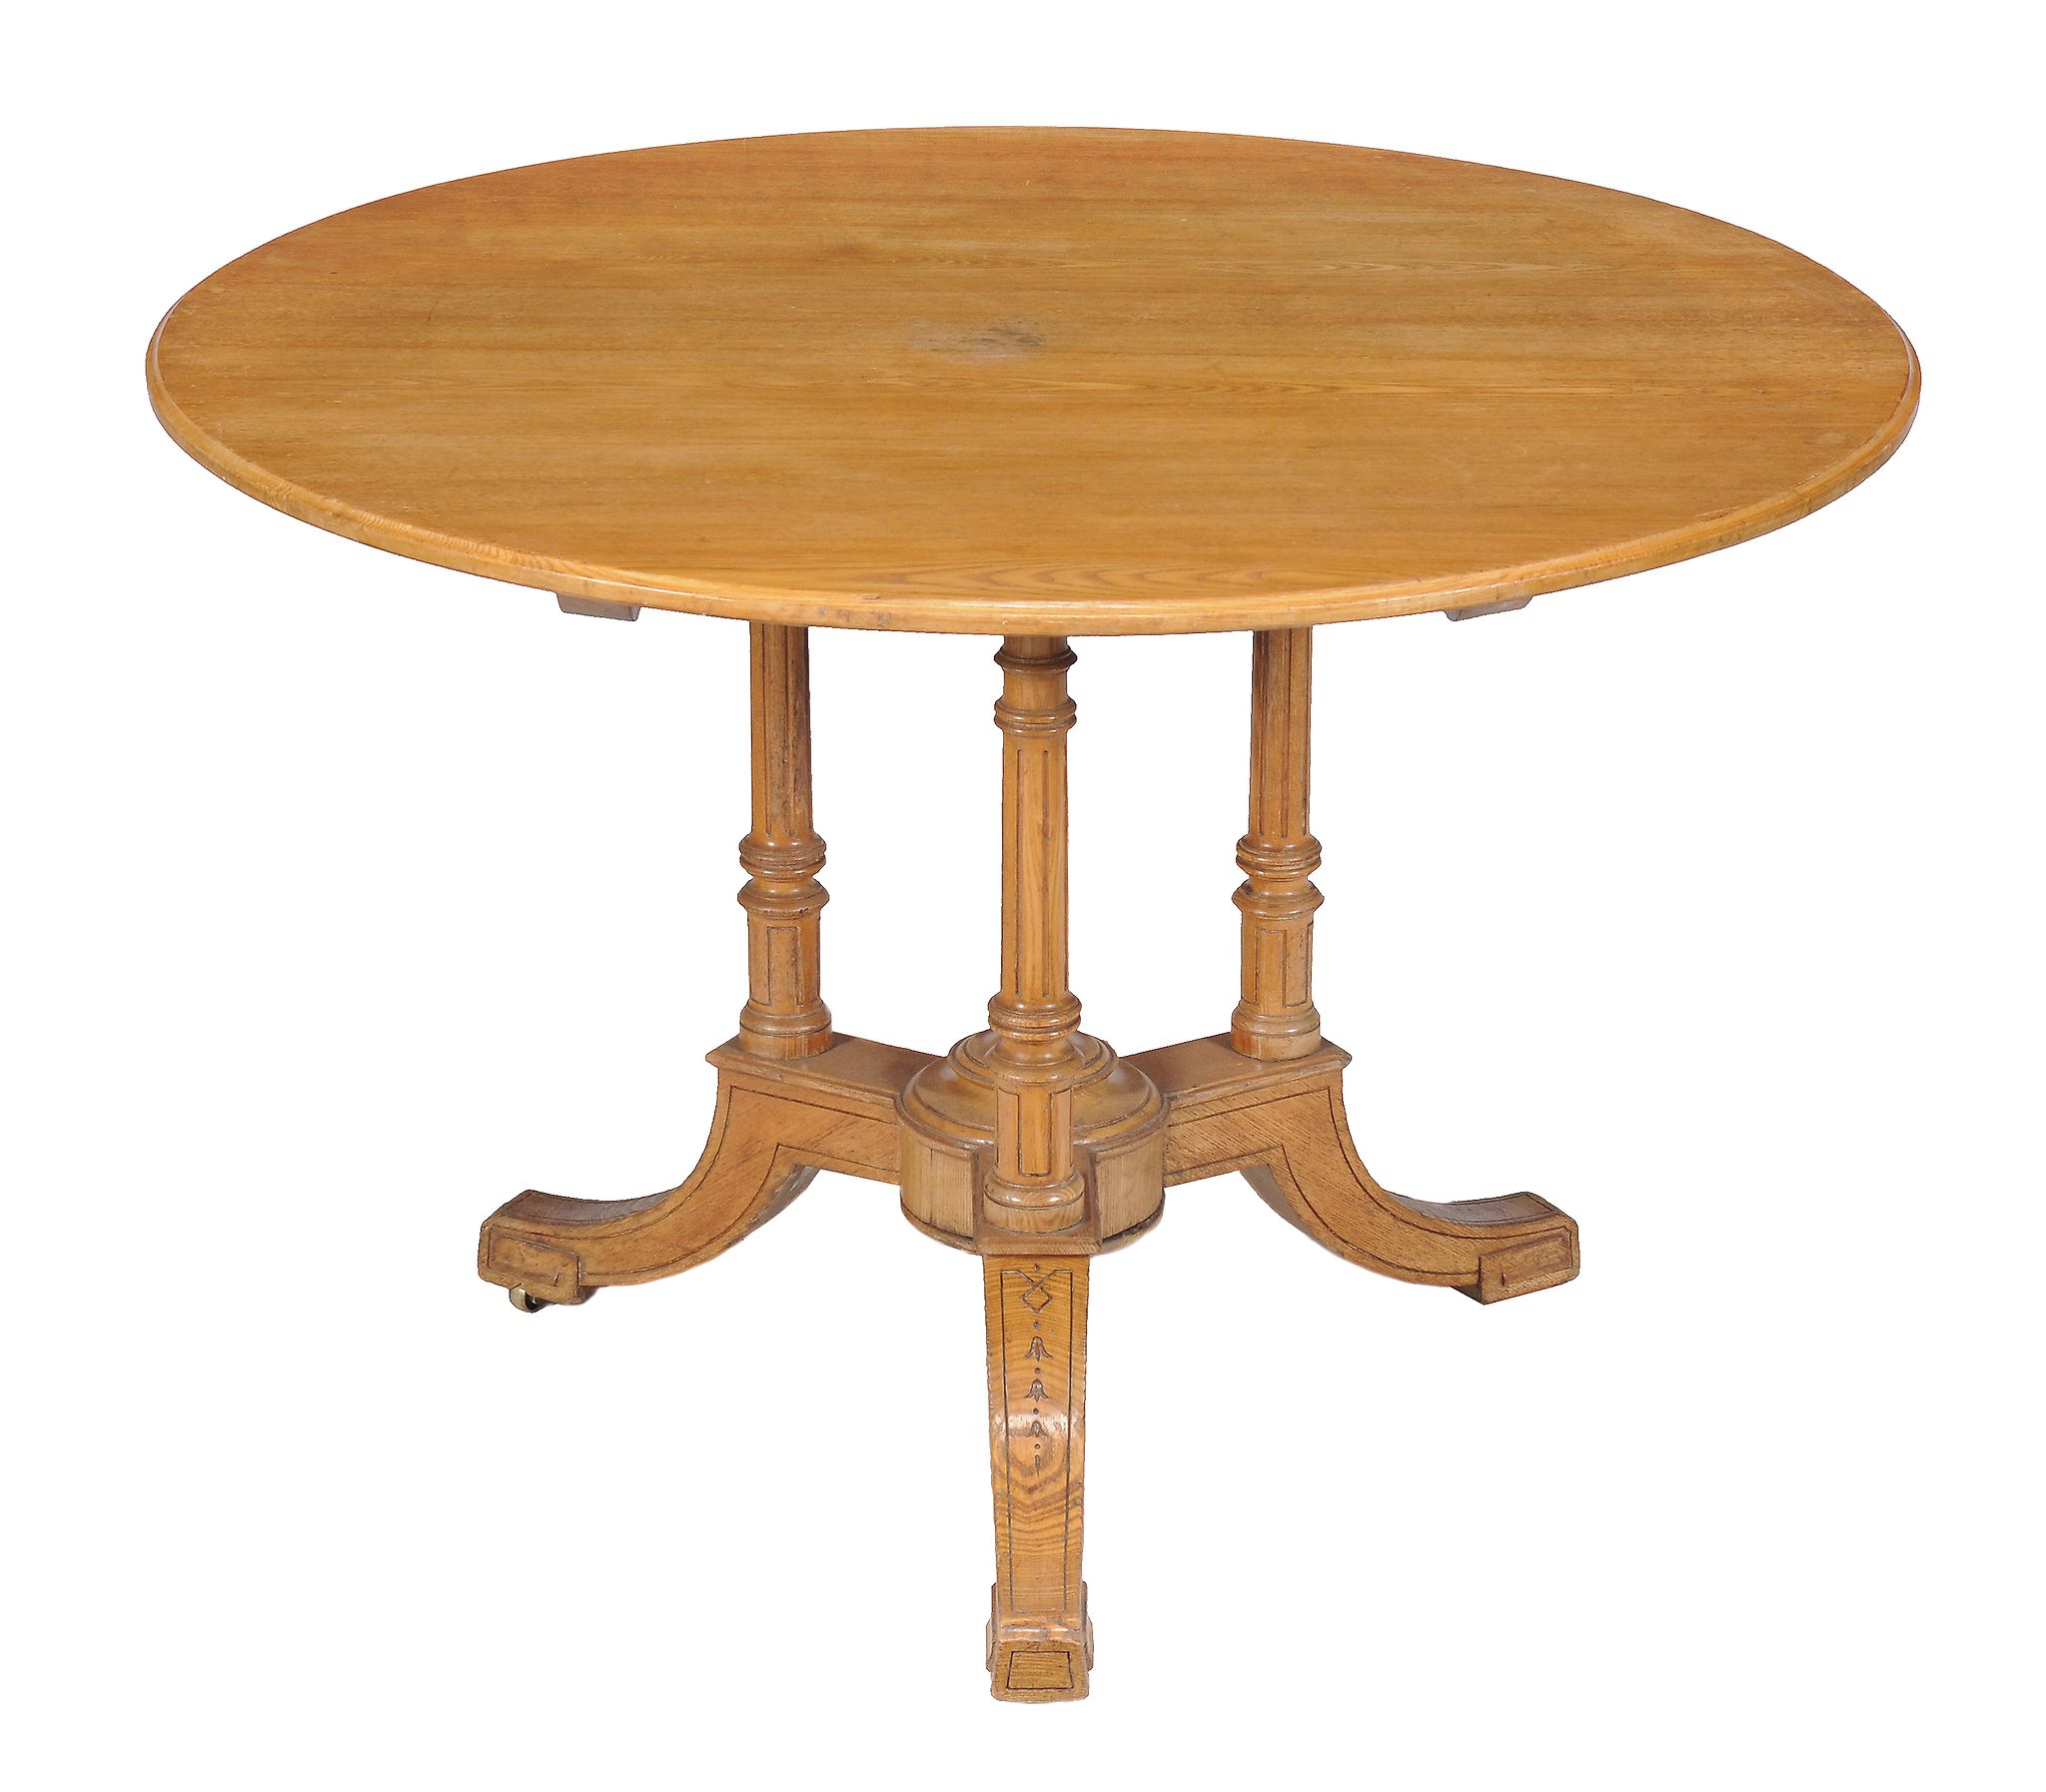 A Victorian ash circular centre table , circa 1860, attributed to Gillows, with fluted supports